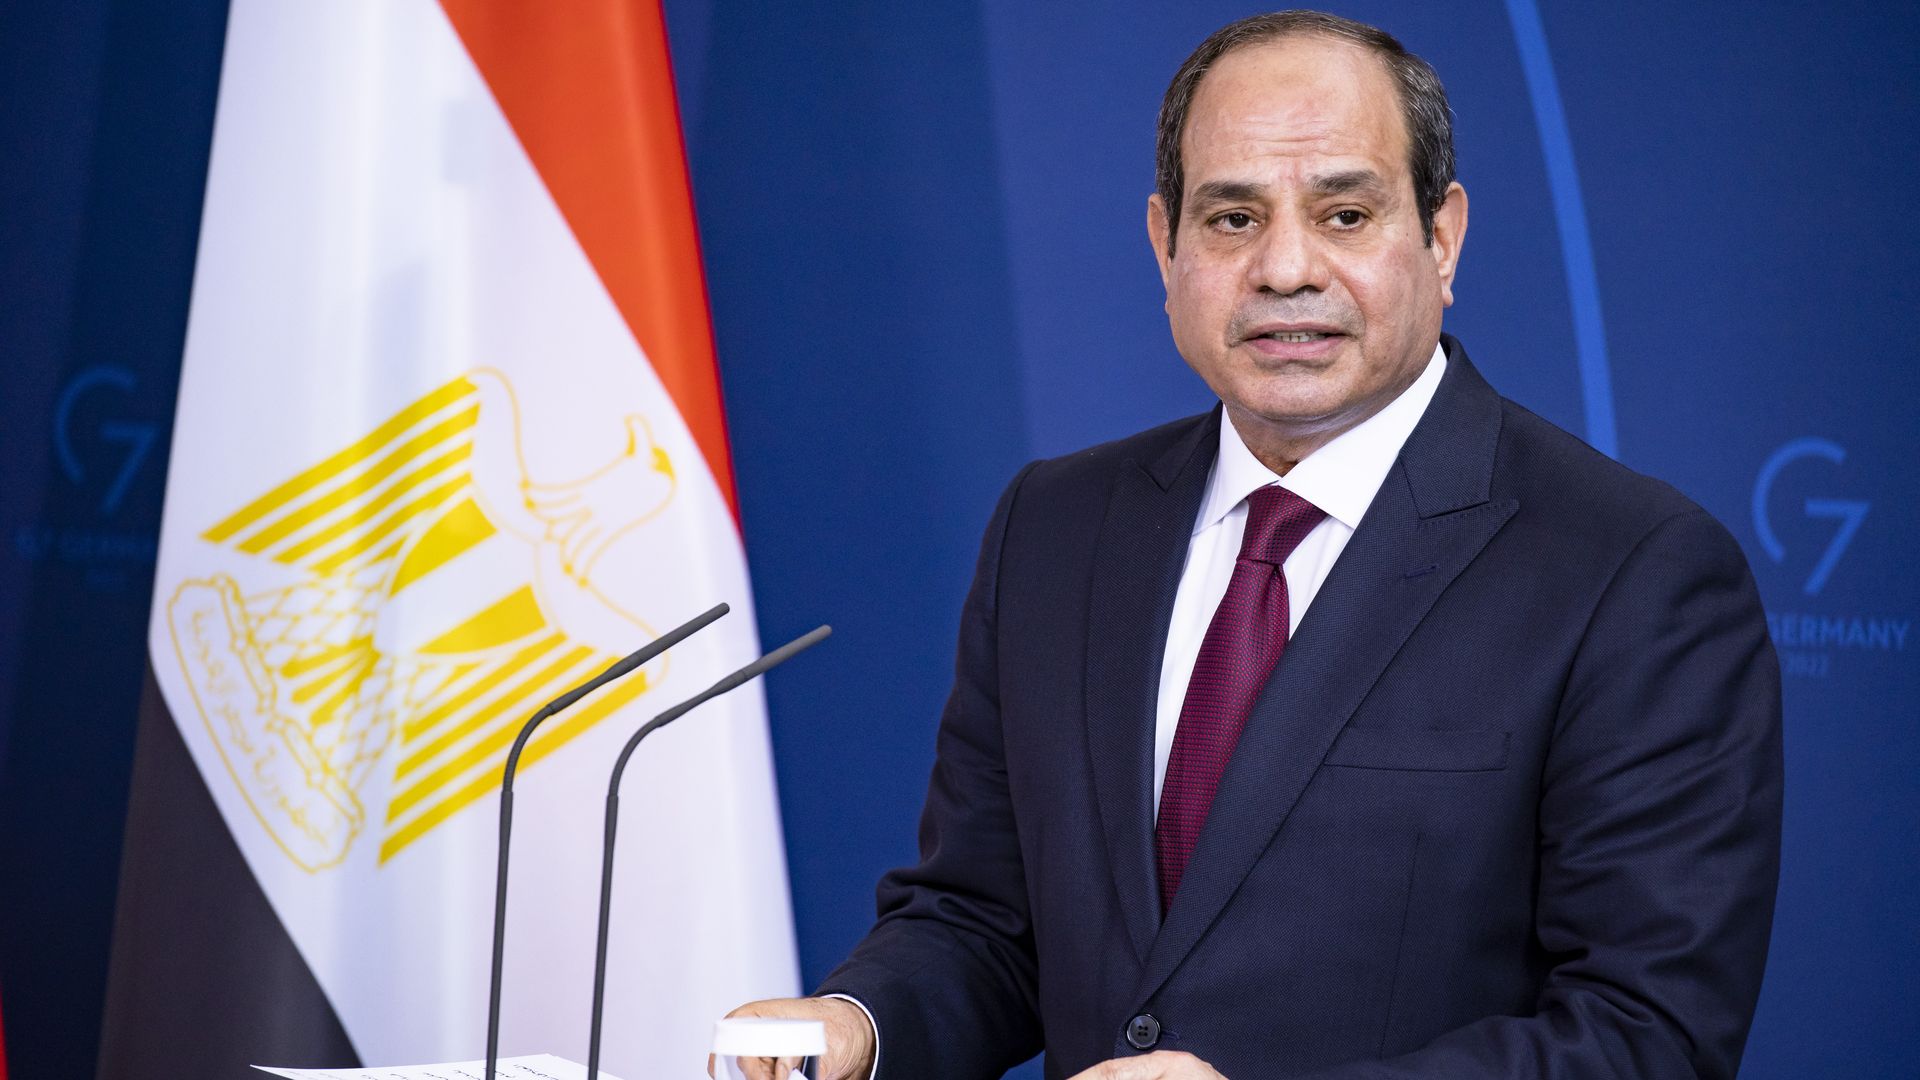 Egyptian President Abdel Fattah el-Sisi holds a press conference at the Chancellery in Berlin, Germany on July 18.